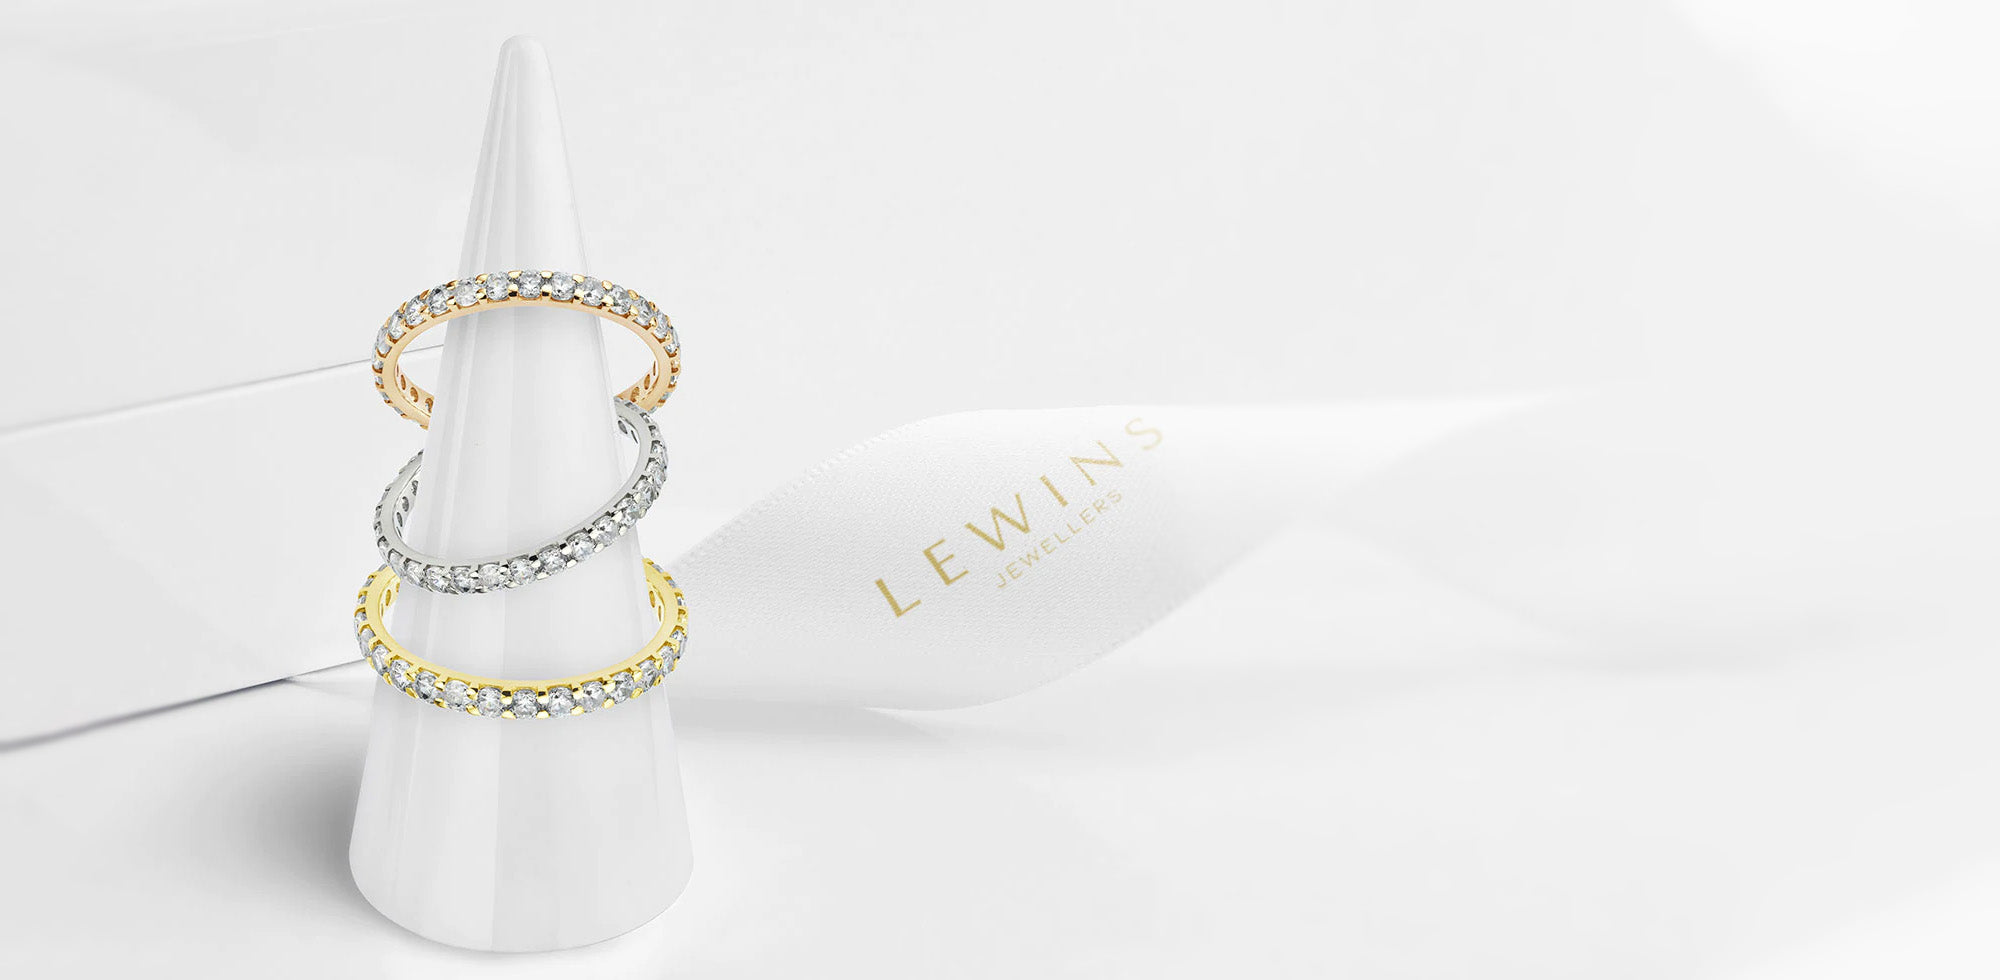 Full eternity rings set with diamonds in yellow, white and rose gold. 